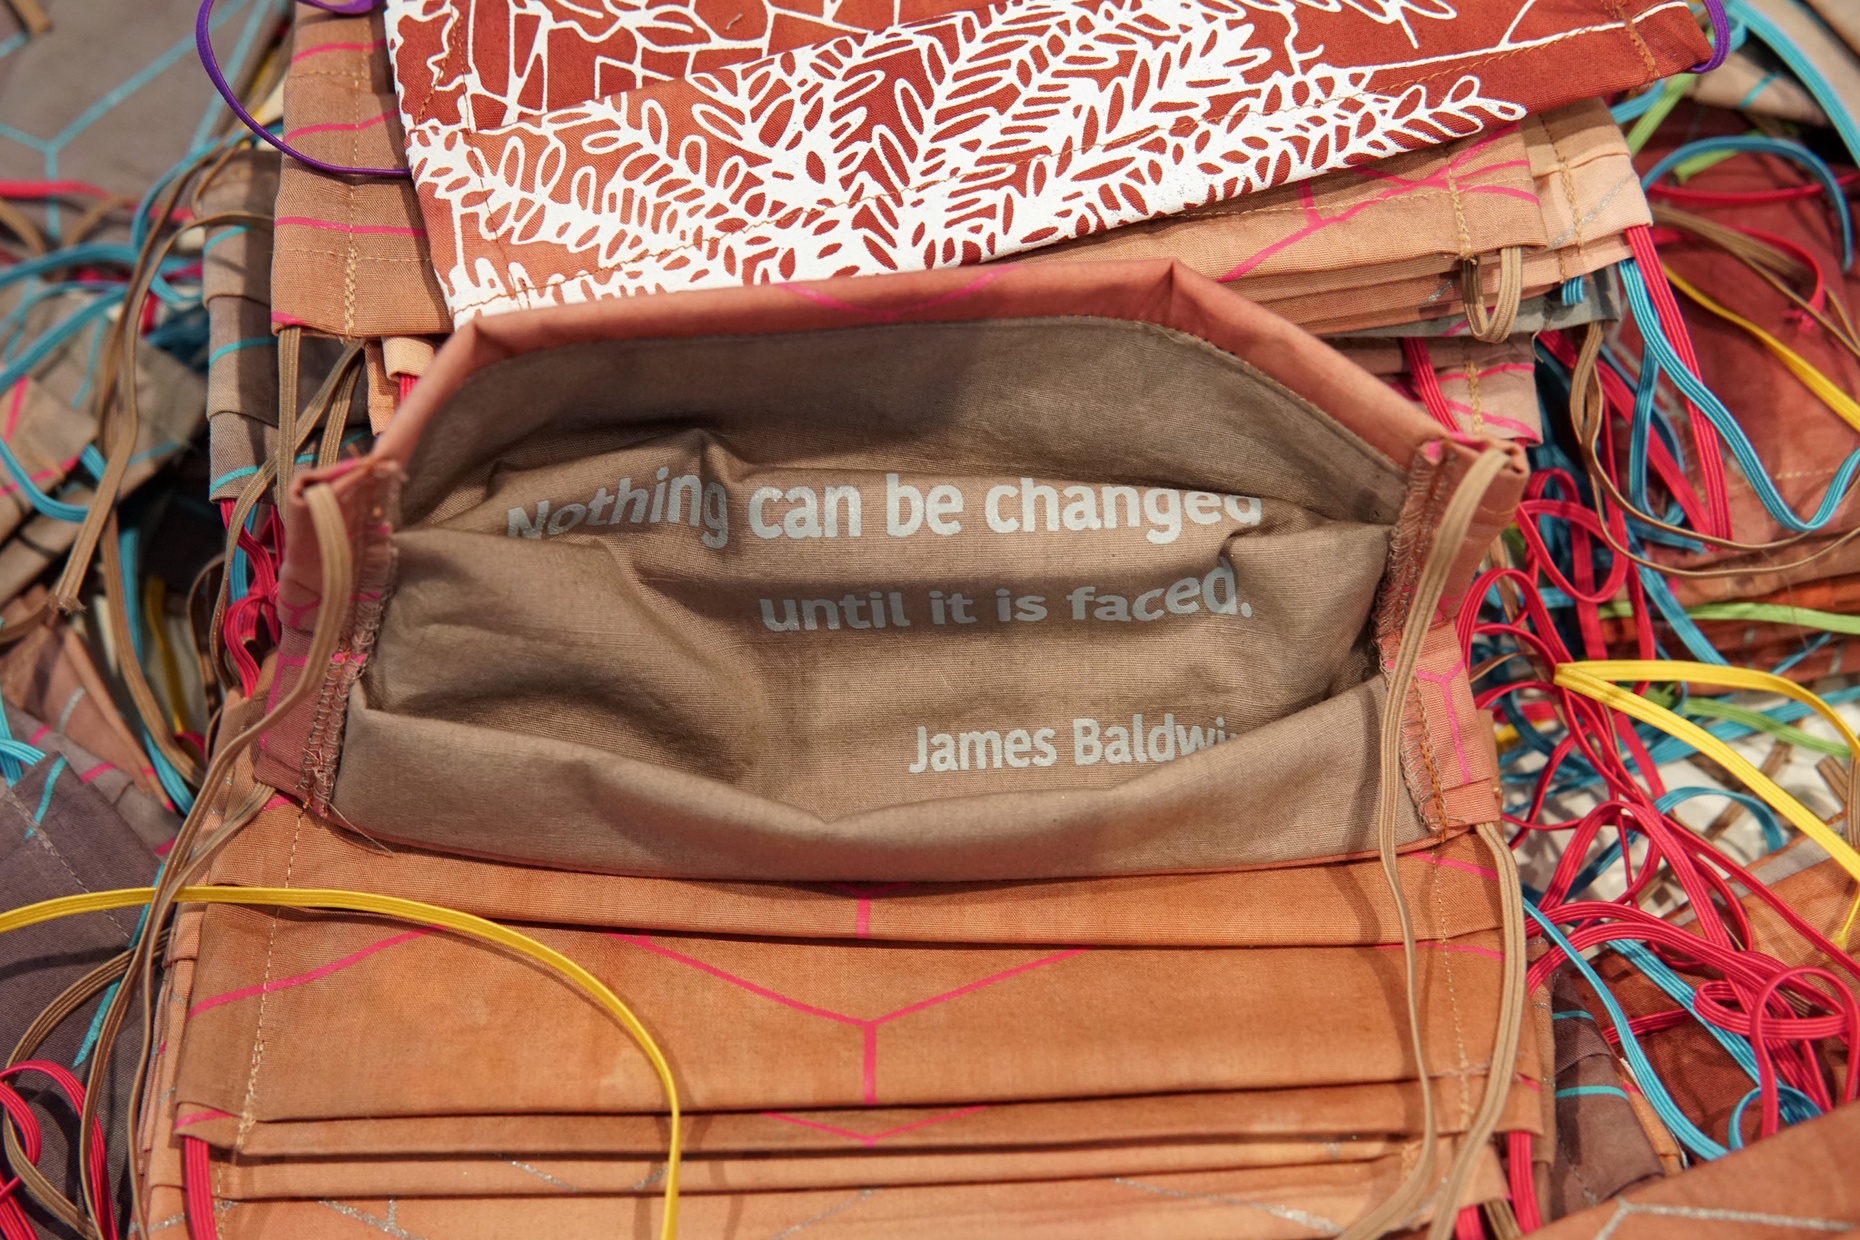 Numerous, colorful, homemade patterned masks laid out. The center mask displays a quote that states, "Nothing can be changed until it is faced. James Baldwin."